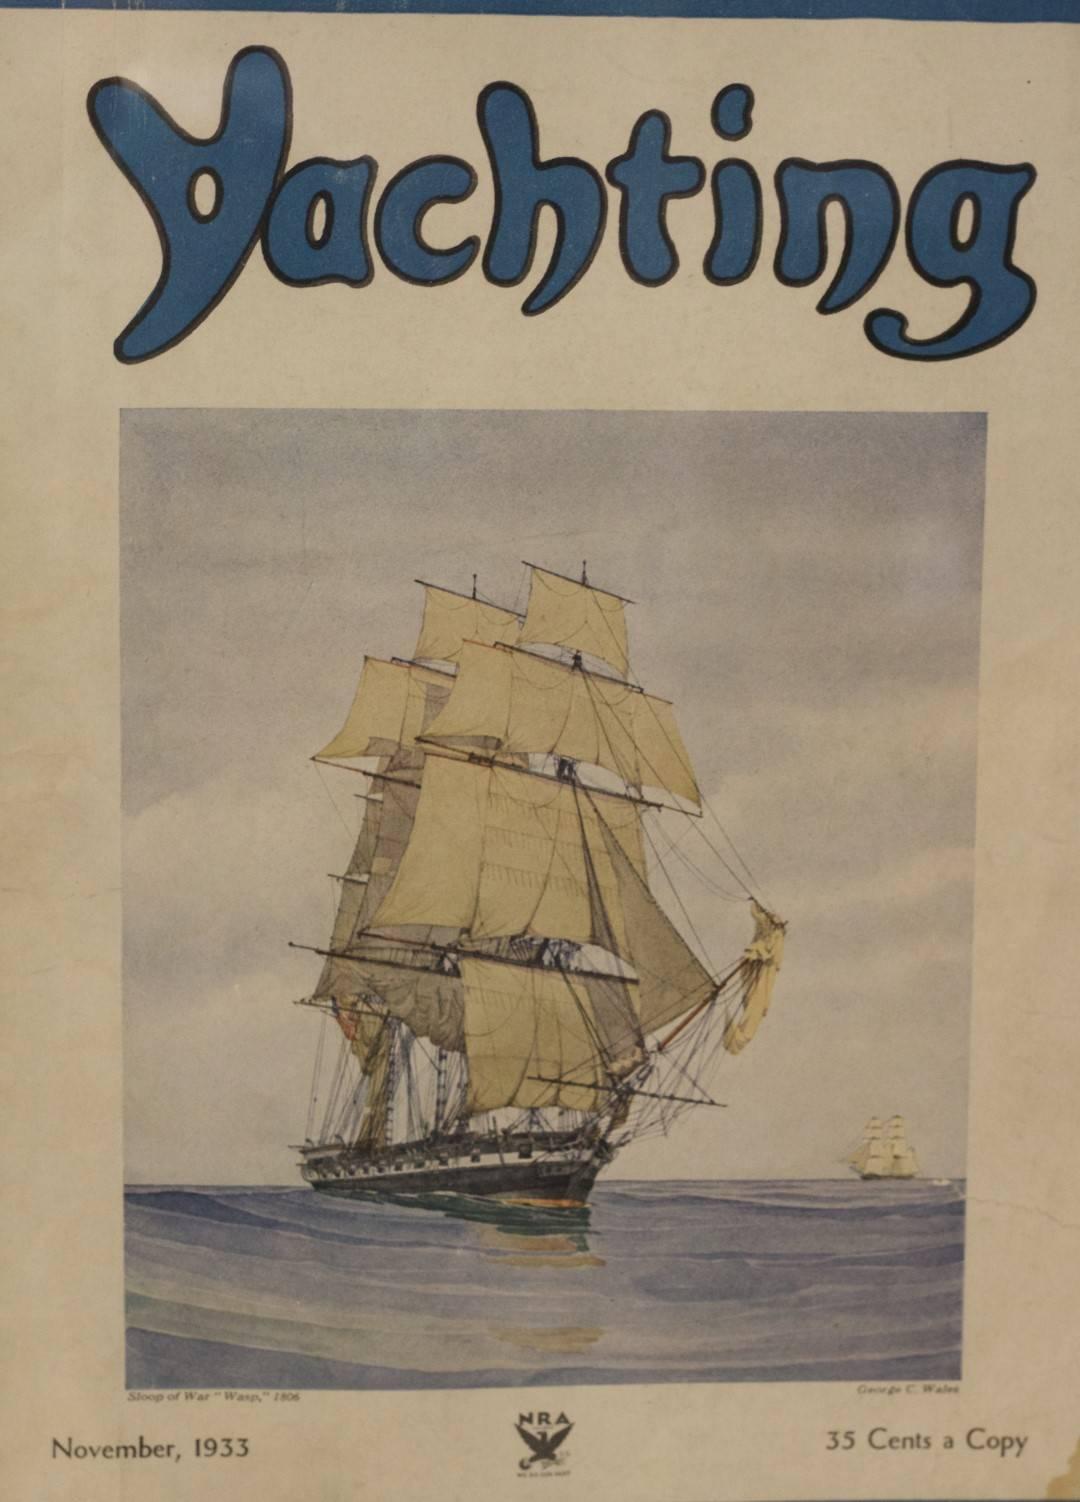 Authentic cover from Yachting Magazine, November 1933 issue. Showing sloop of war wasp of 1806, from a painting by George C Wales. Matted and framed. Dimensions: 17.5